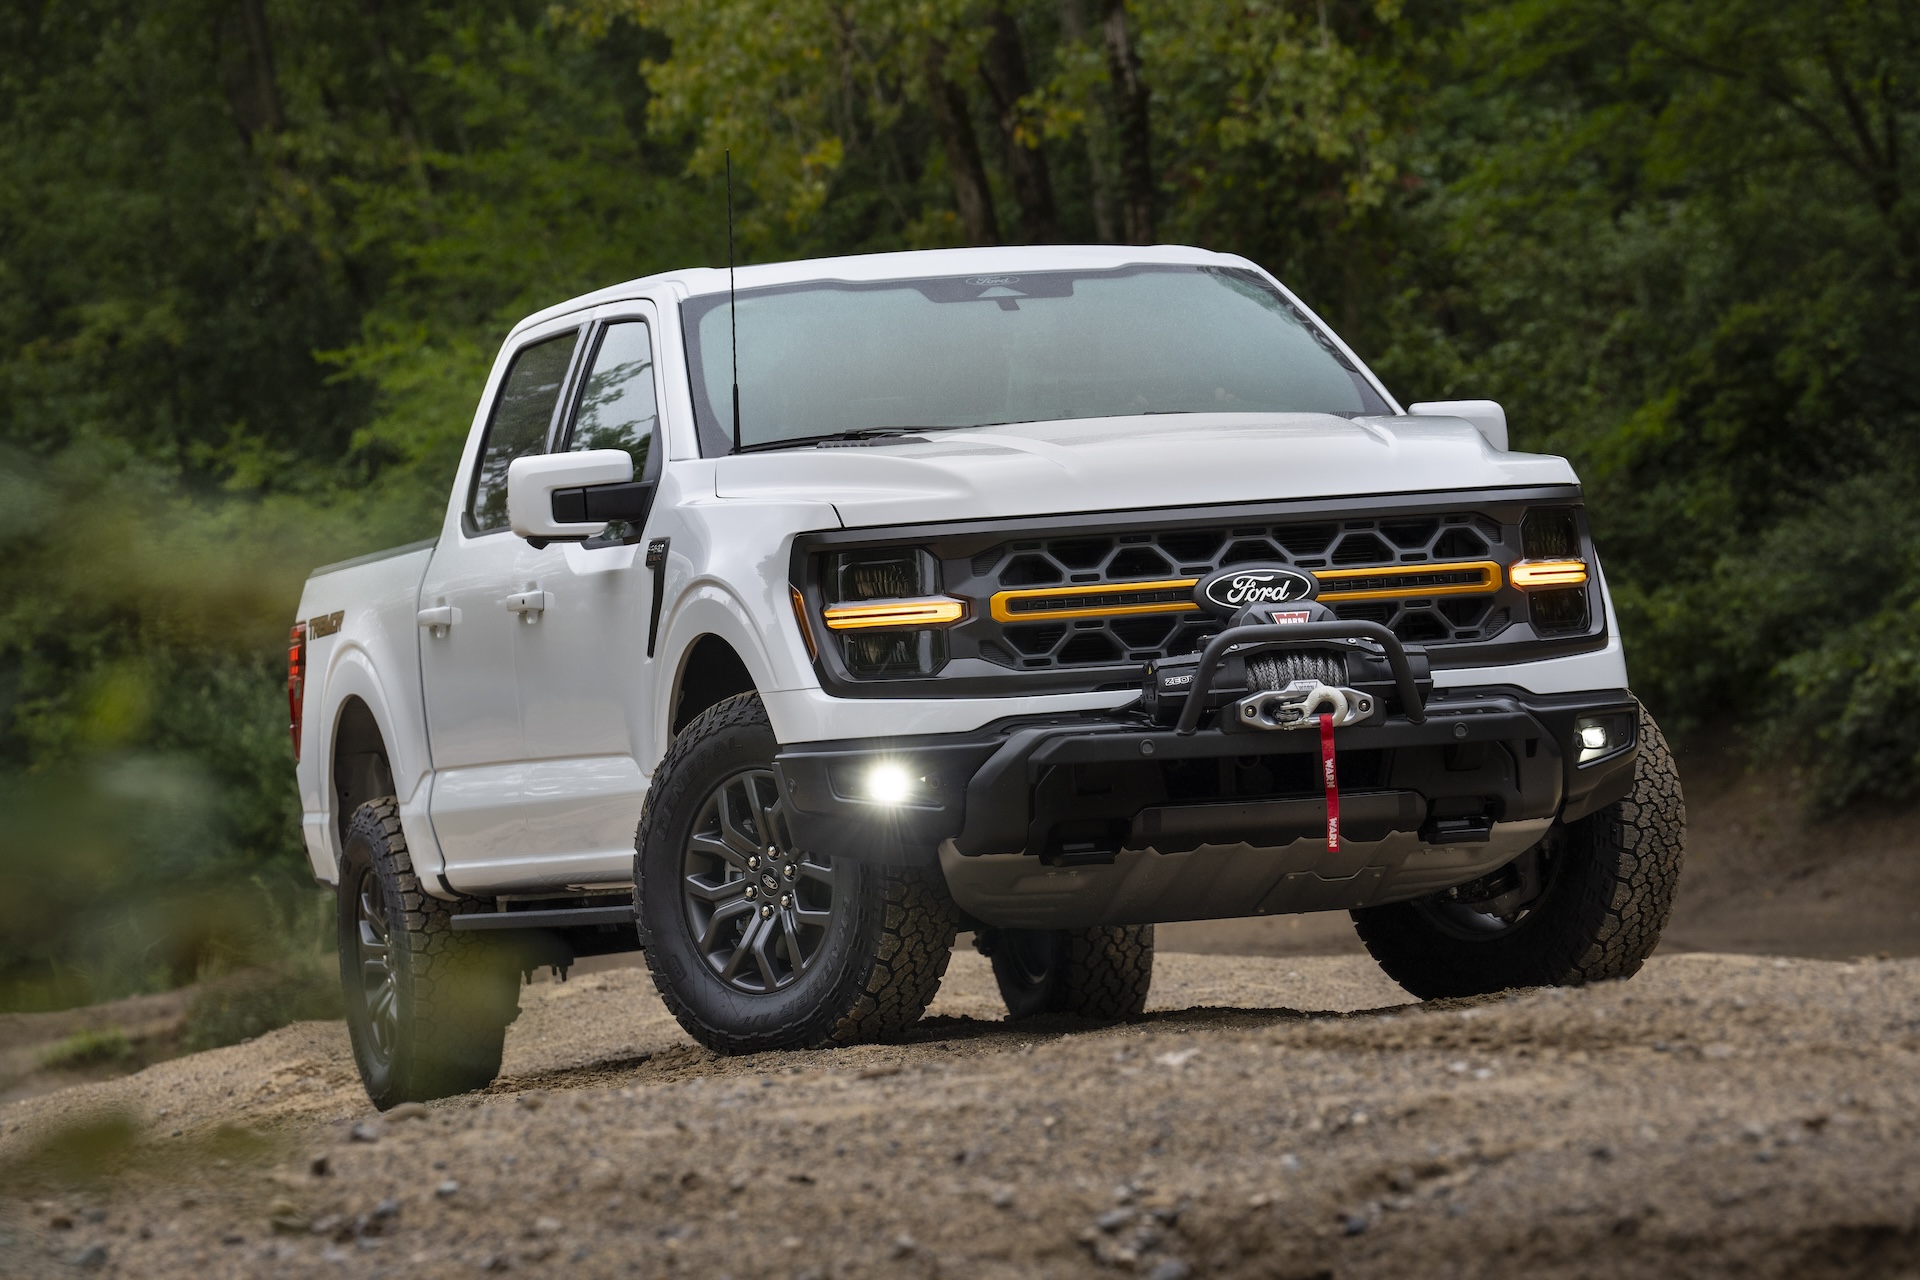 How Do You Stop Ford’s F-150? F-Series Trucks